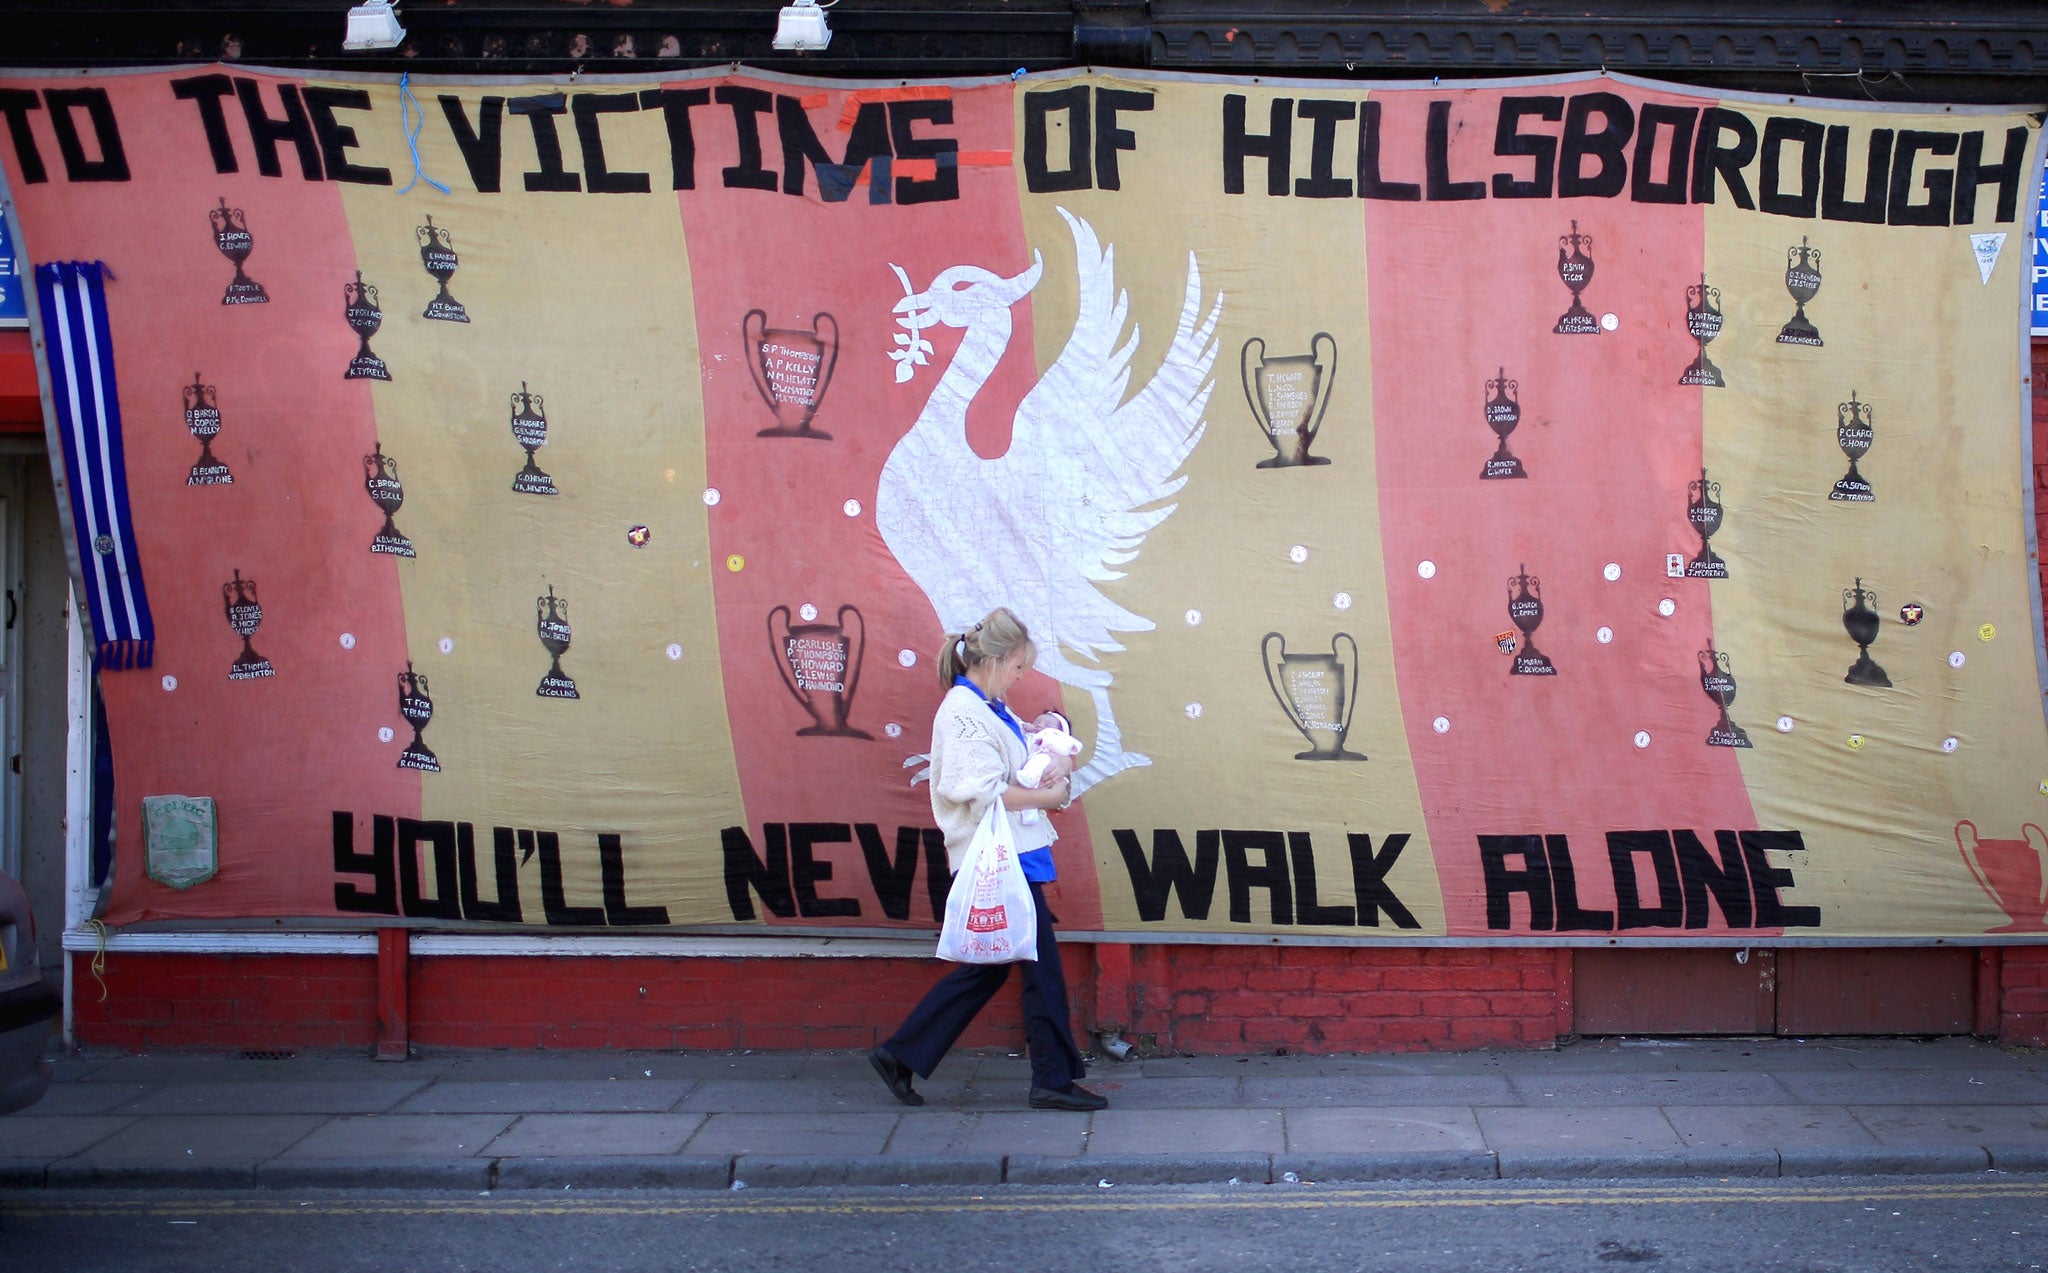 A woman walks past a Hillsborough tribute banner as fans arrive in Anfield for a memorial service marking the 25th anniversary of the Hillsborough Disaster at Anfield stadium in Liverpool